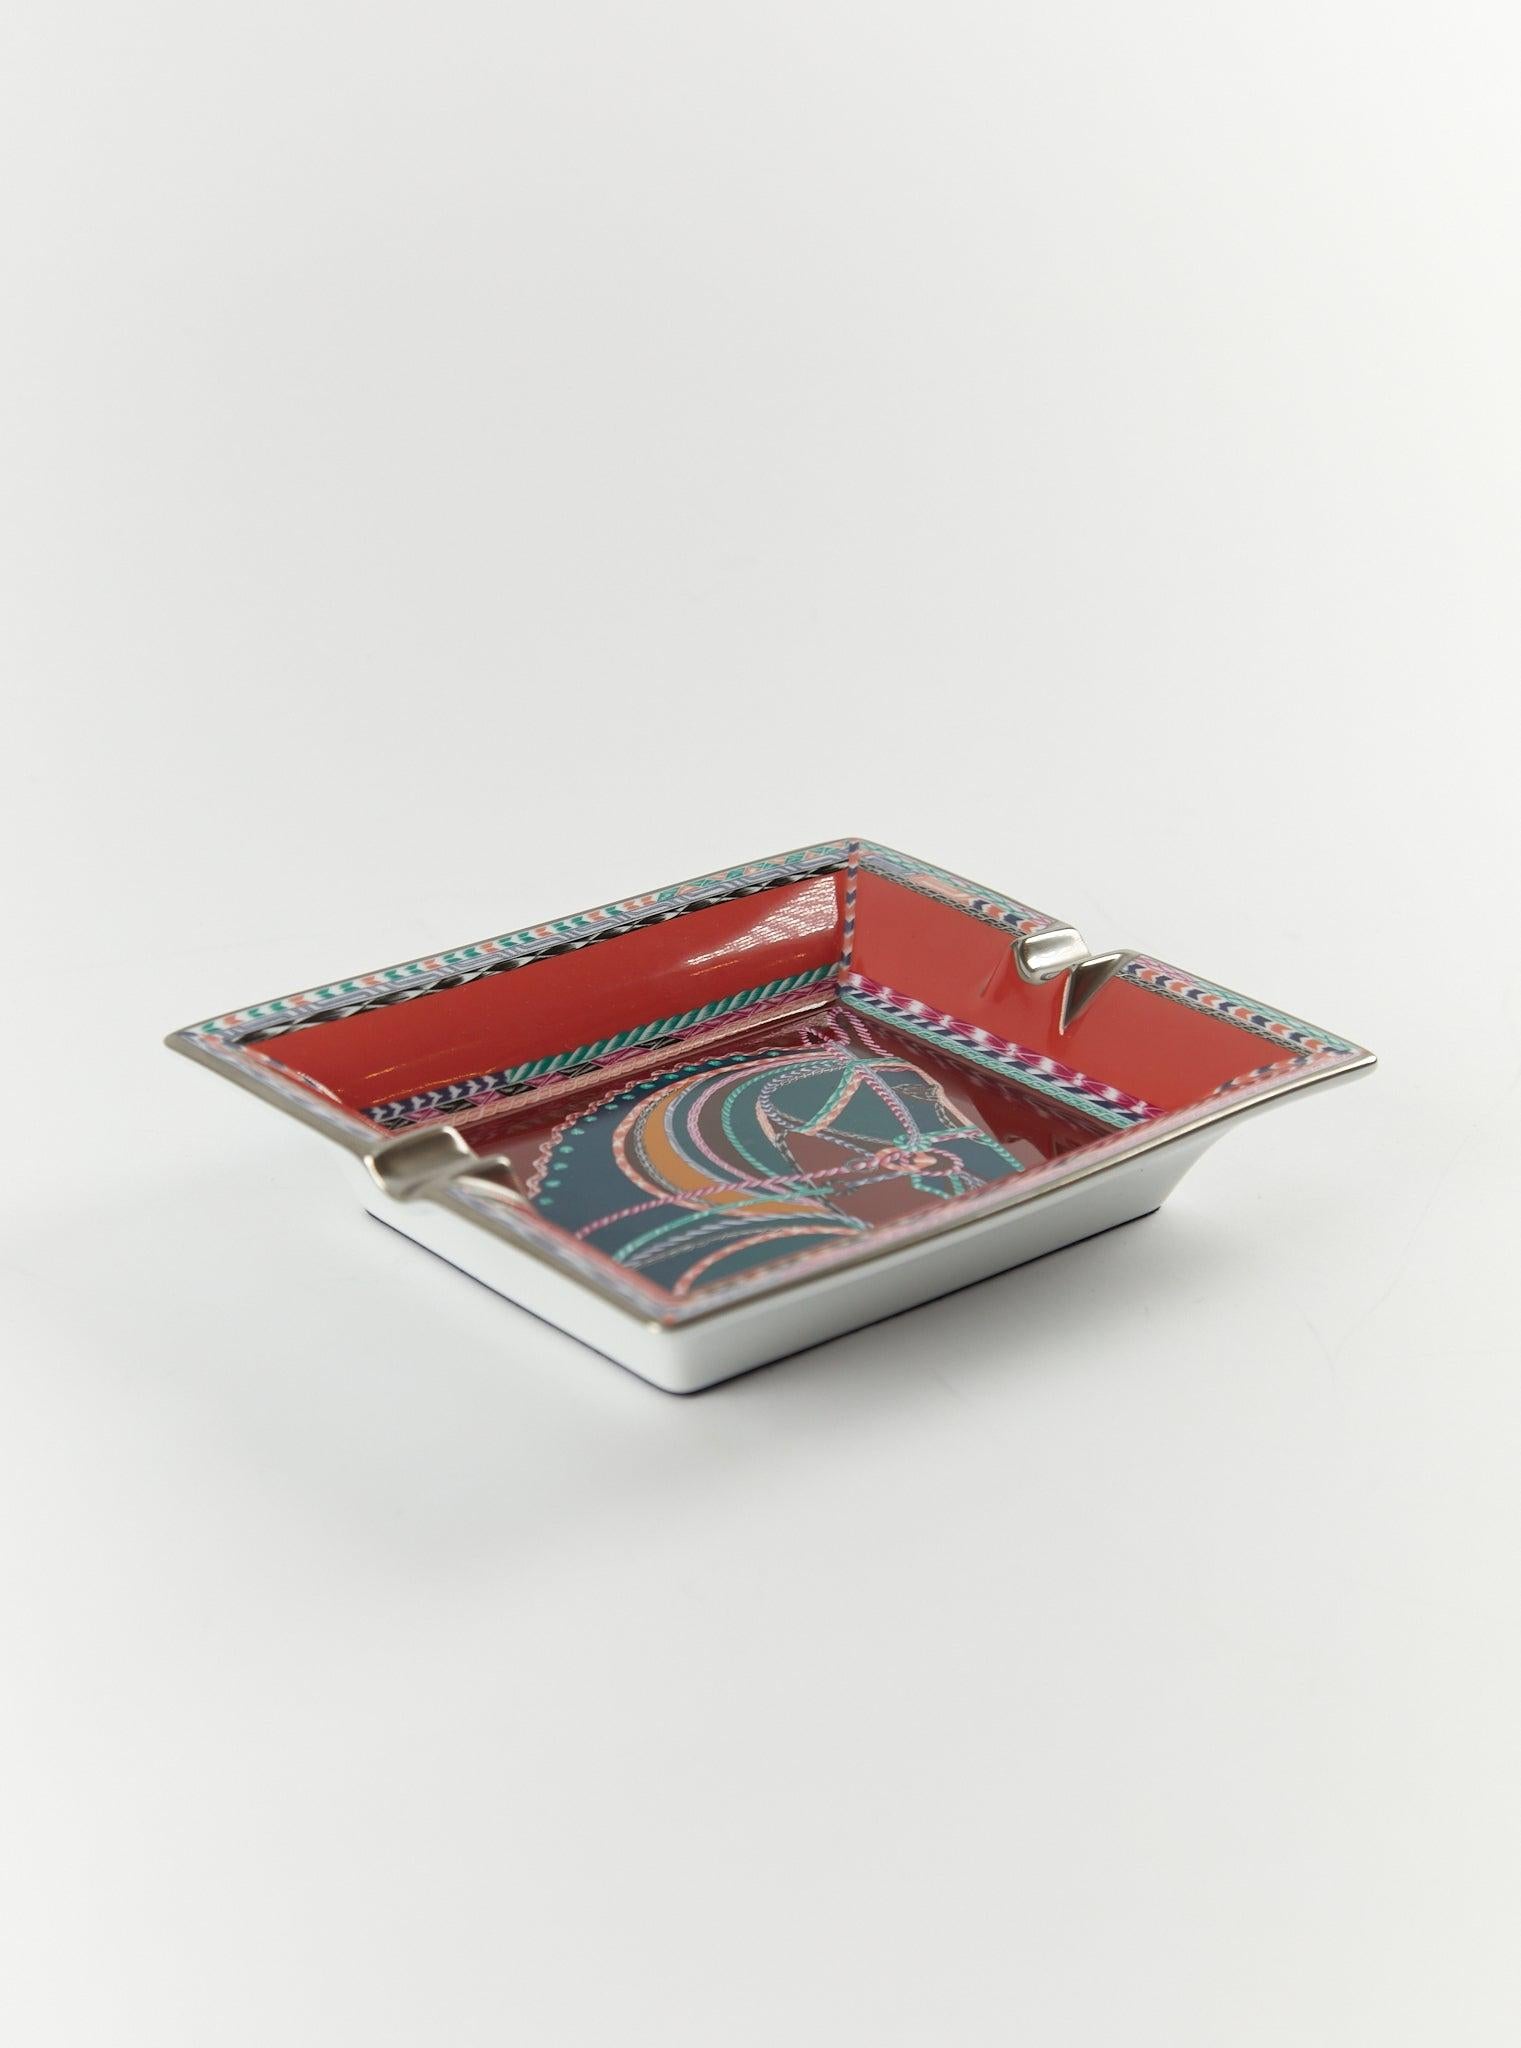 Hermès ashtray in porcelain with hand painted platinum trim and velvet goatskin base

Terracotta

Decorated using chromolithography

